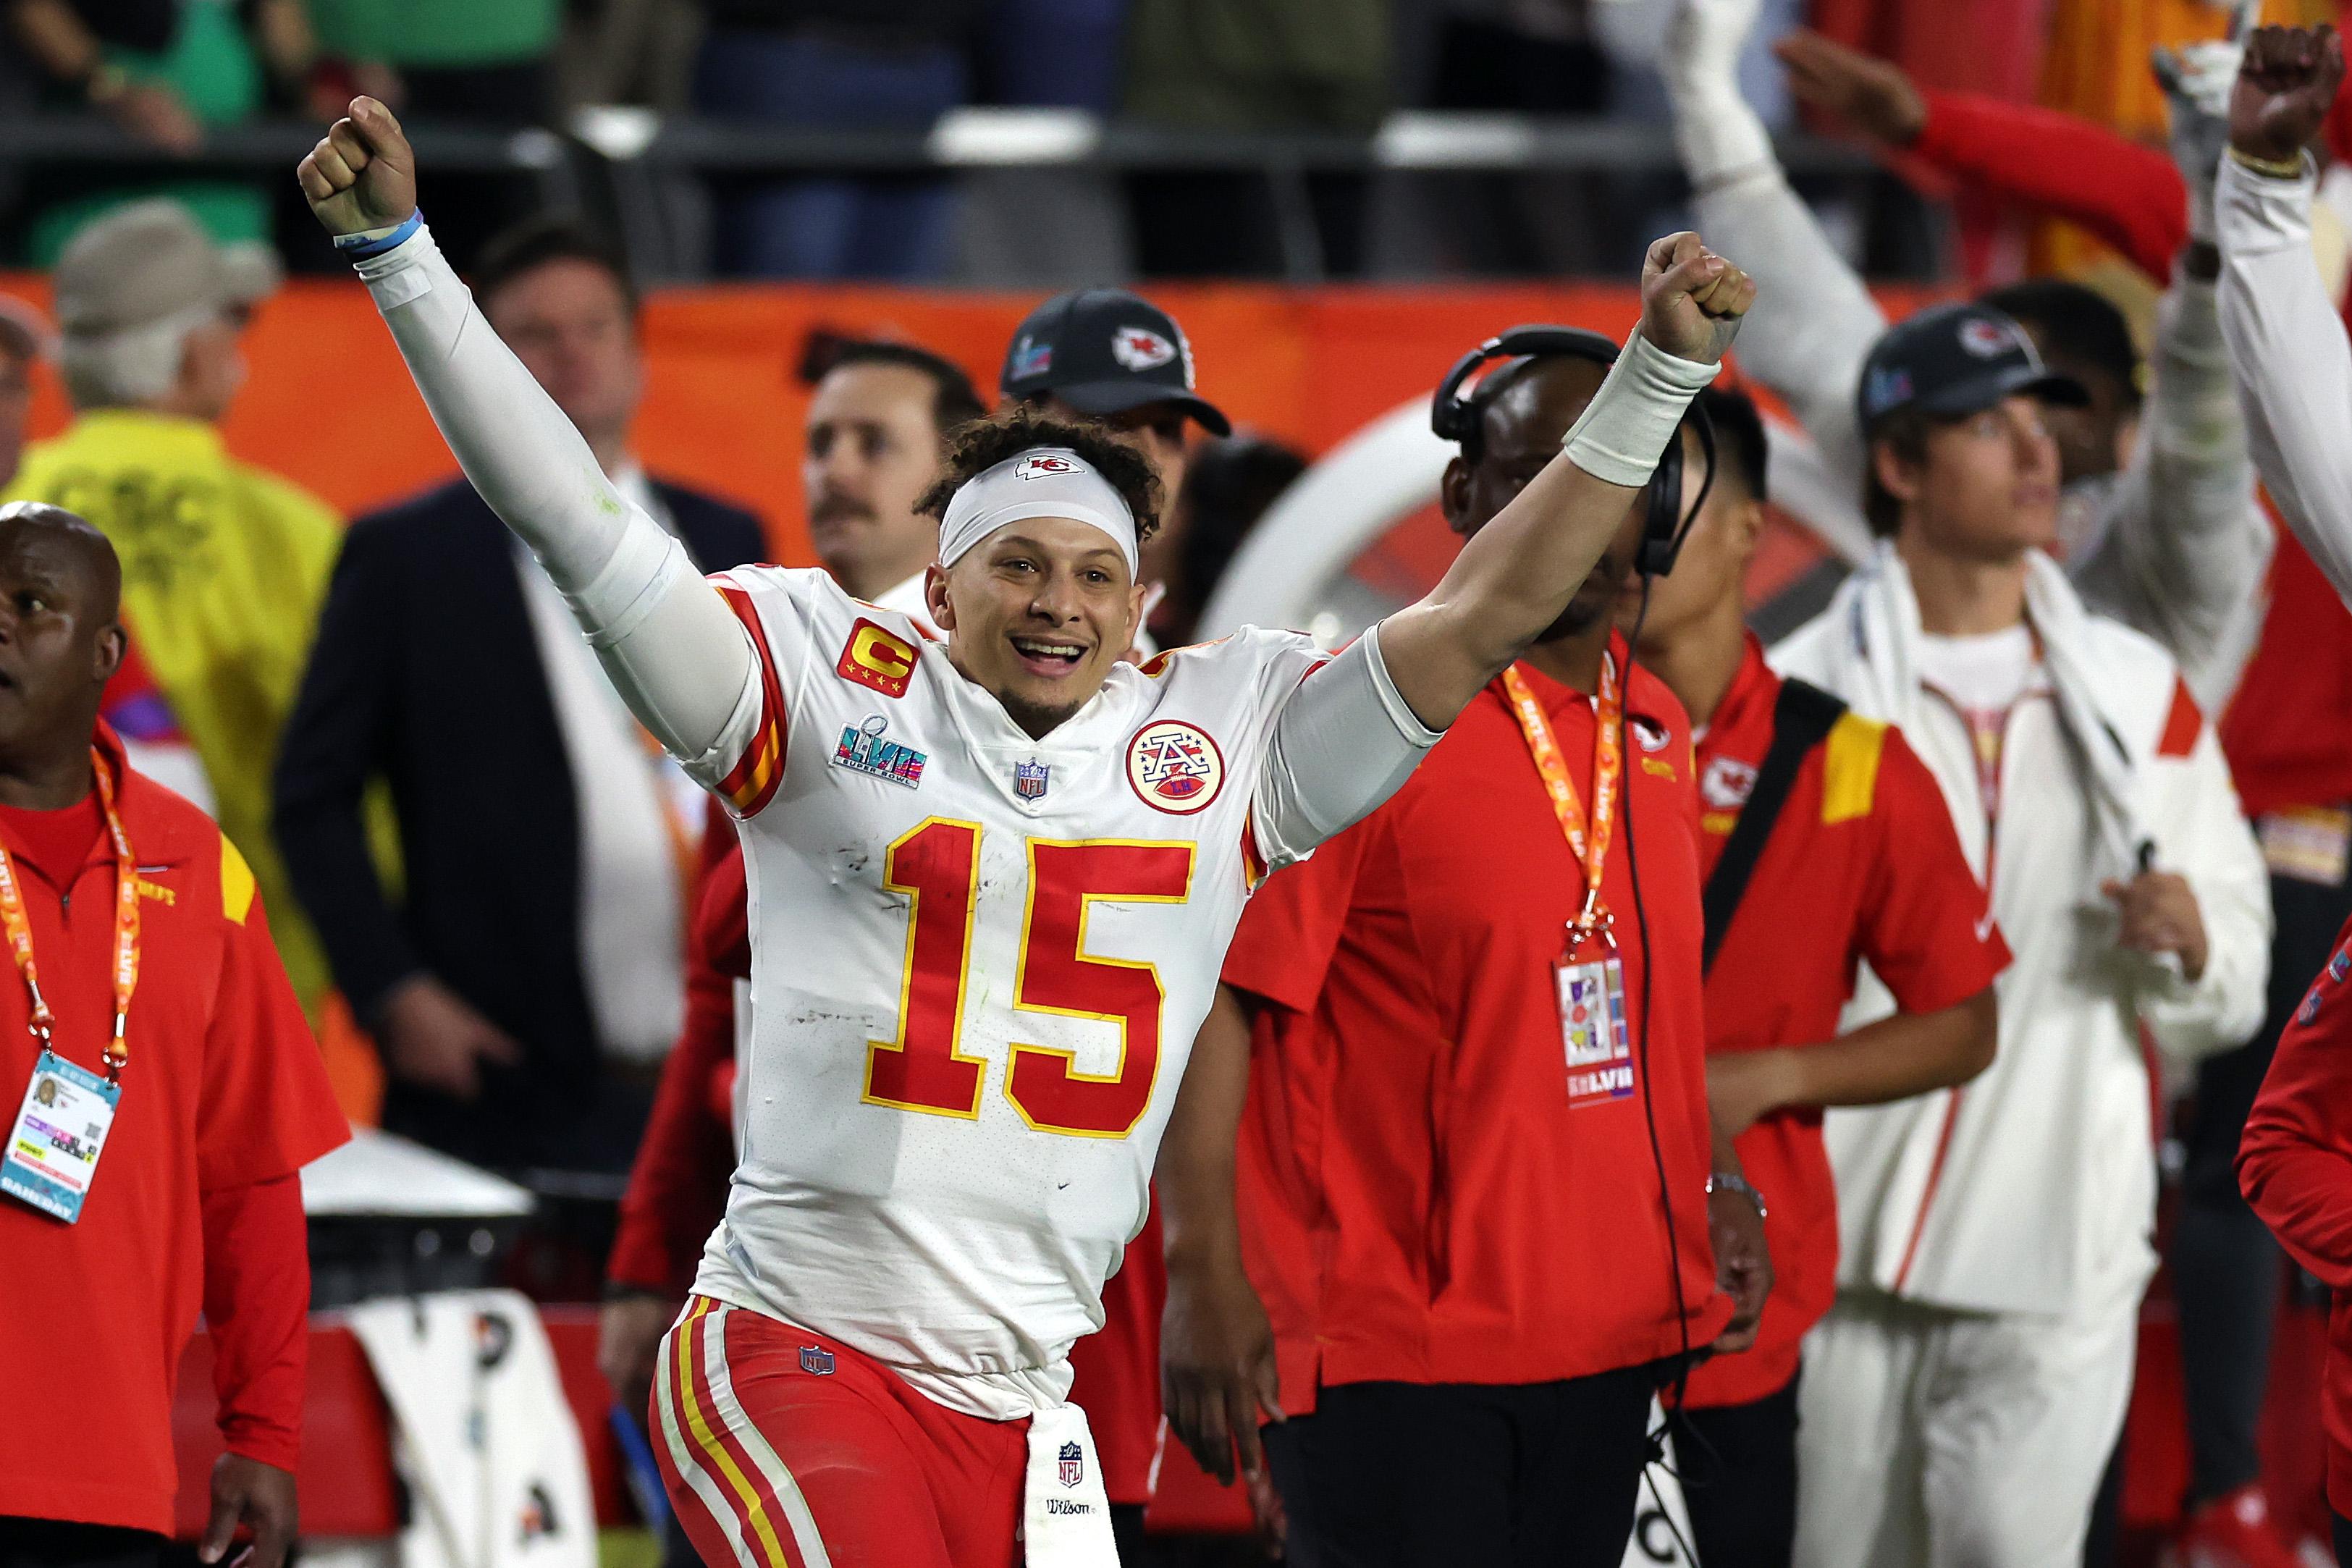 Mahomes smiles, raises his arms, and running onto the field